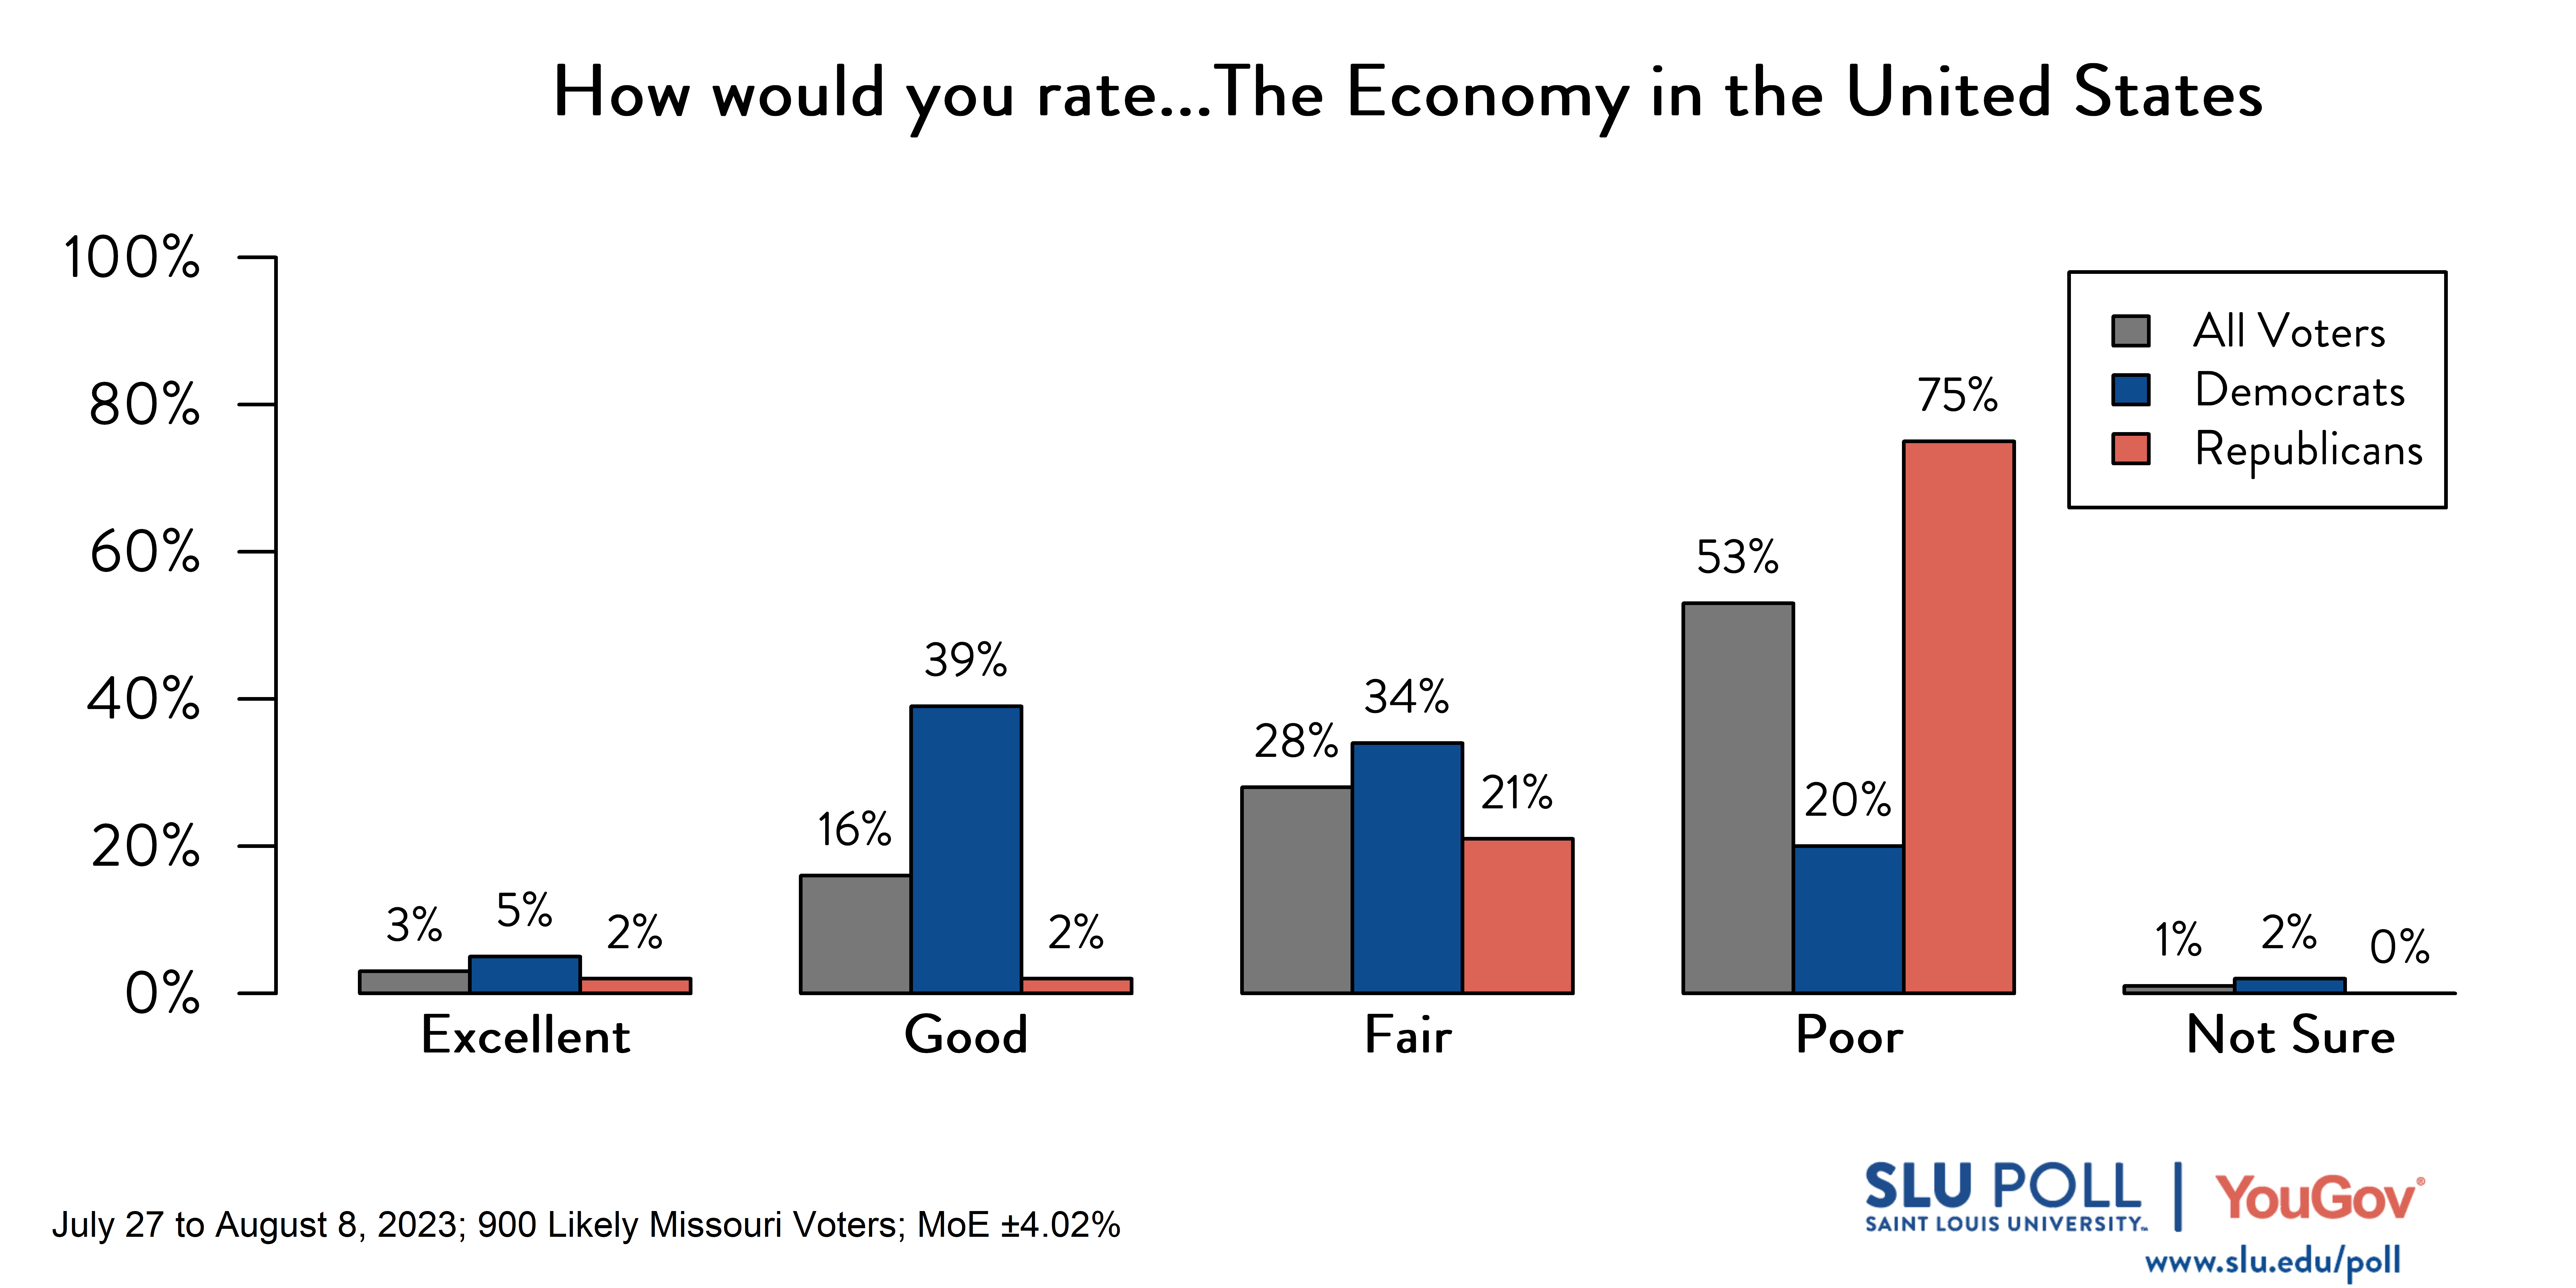 Likely voters' responses to 'How would you rate the condition of the following: The Economy in the United States?': 3% Excellent, 16% Good, 28% Fair, 53% Poor, and 1% Not sure. Democratic voters' responses: ' 5% Excellent, 39% Good, 34% Fair, 20% Poor, and 2% Not sure. Republican voters' responses: 2% Excellent, 2% Good, 21% Fair, 75% Poor, and 0% Not sure.